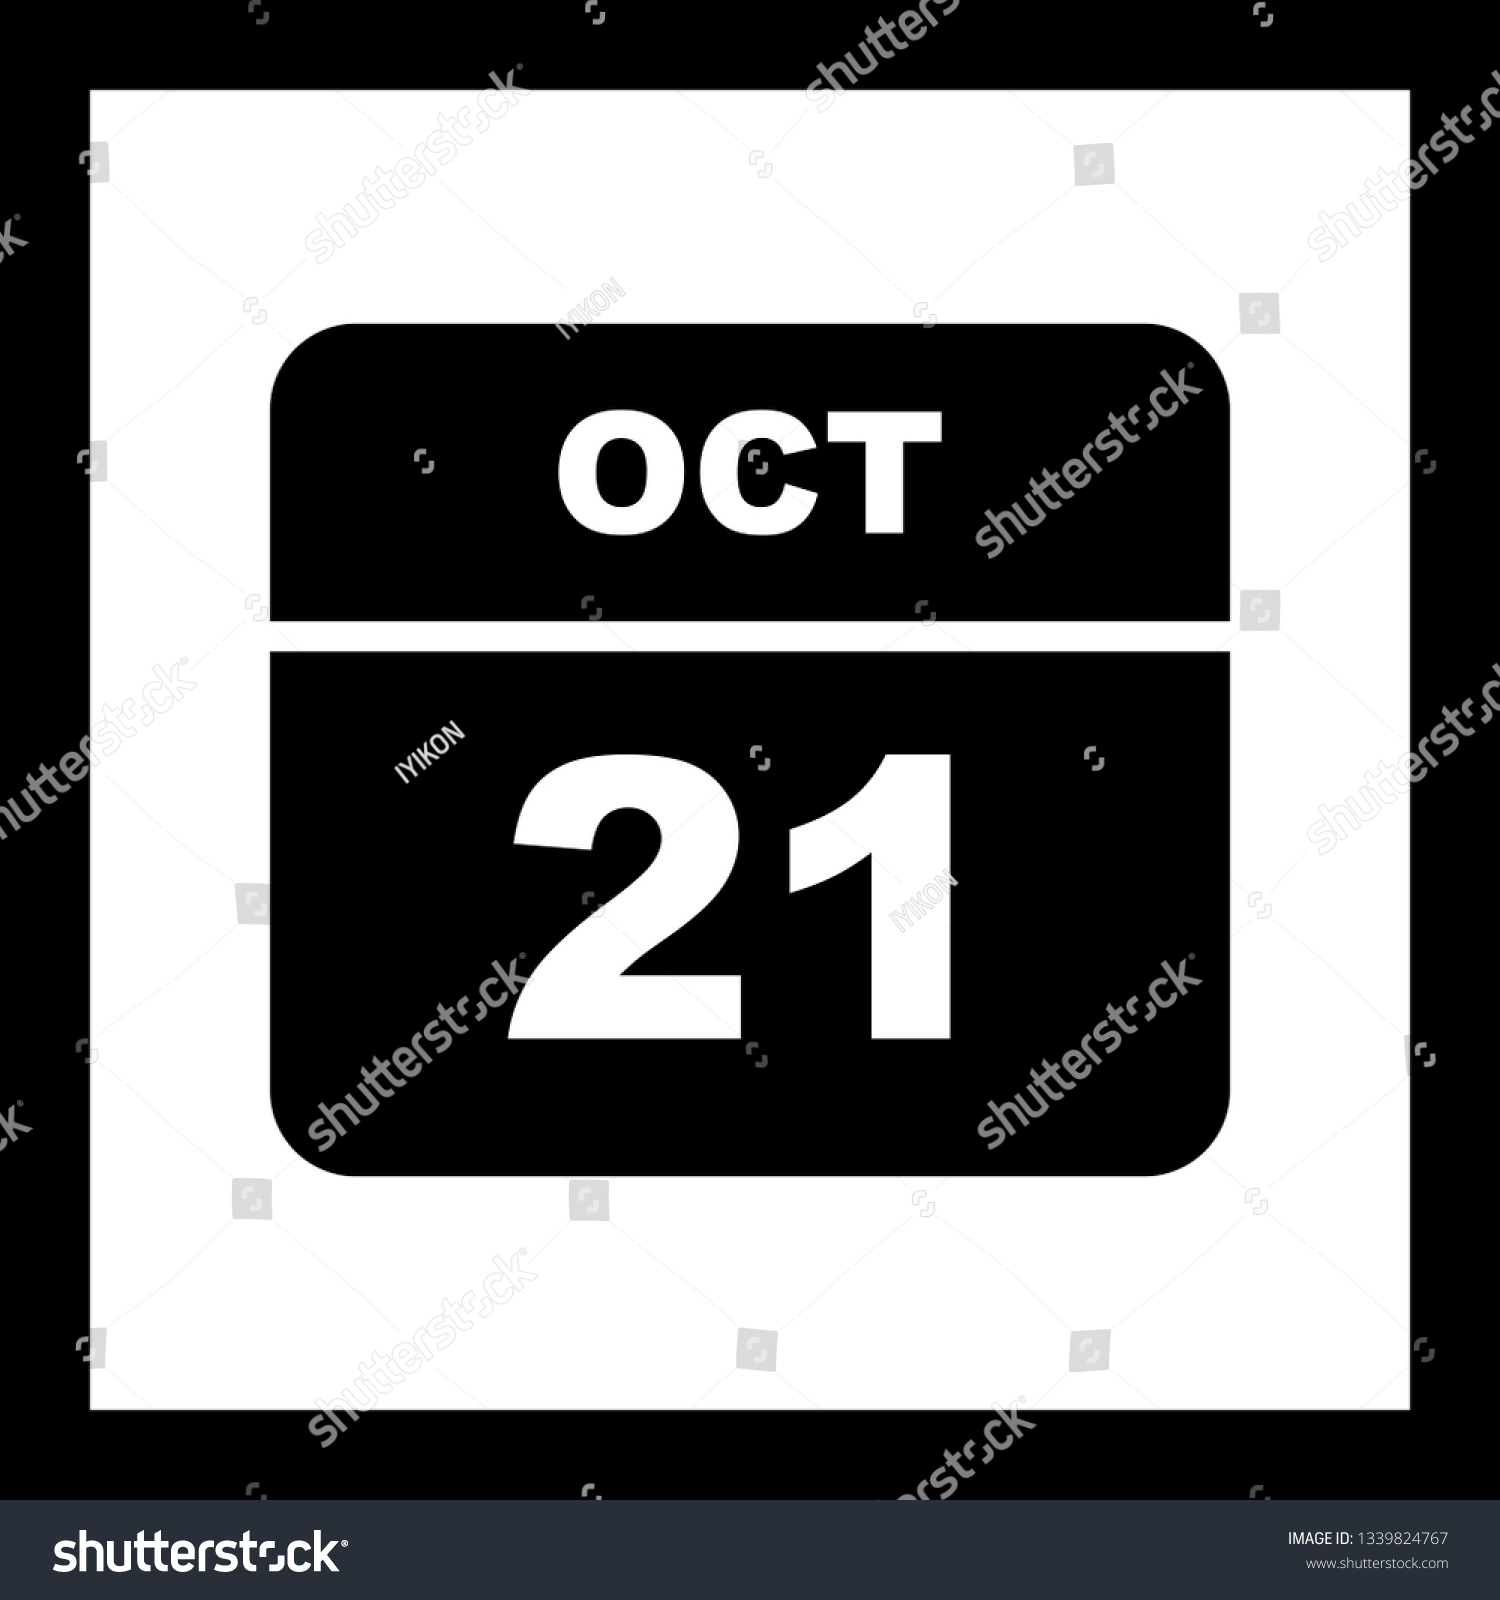 October 21st Date On A Single Day Calendar Royalty Free Stock Photo